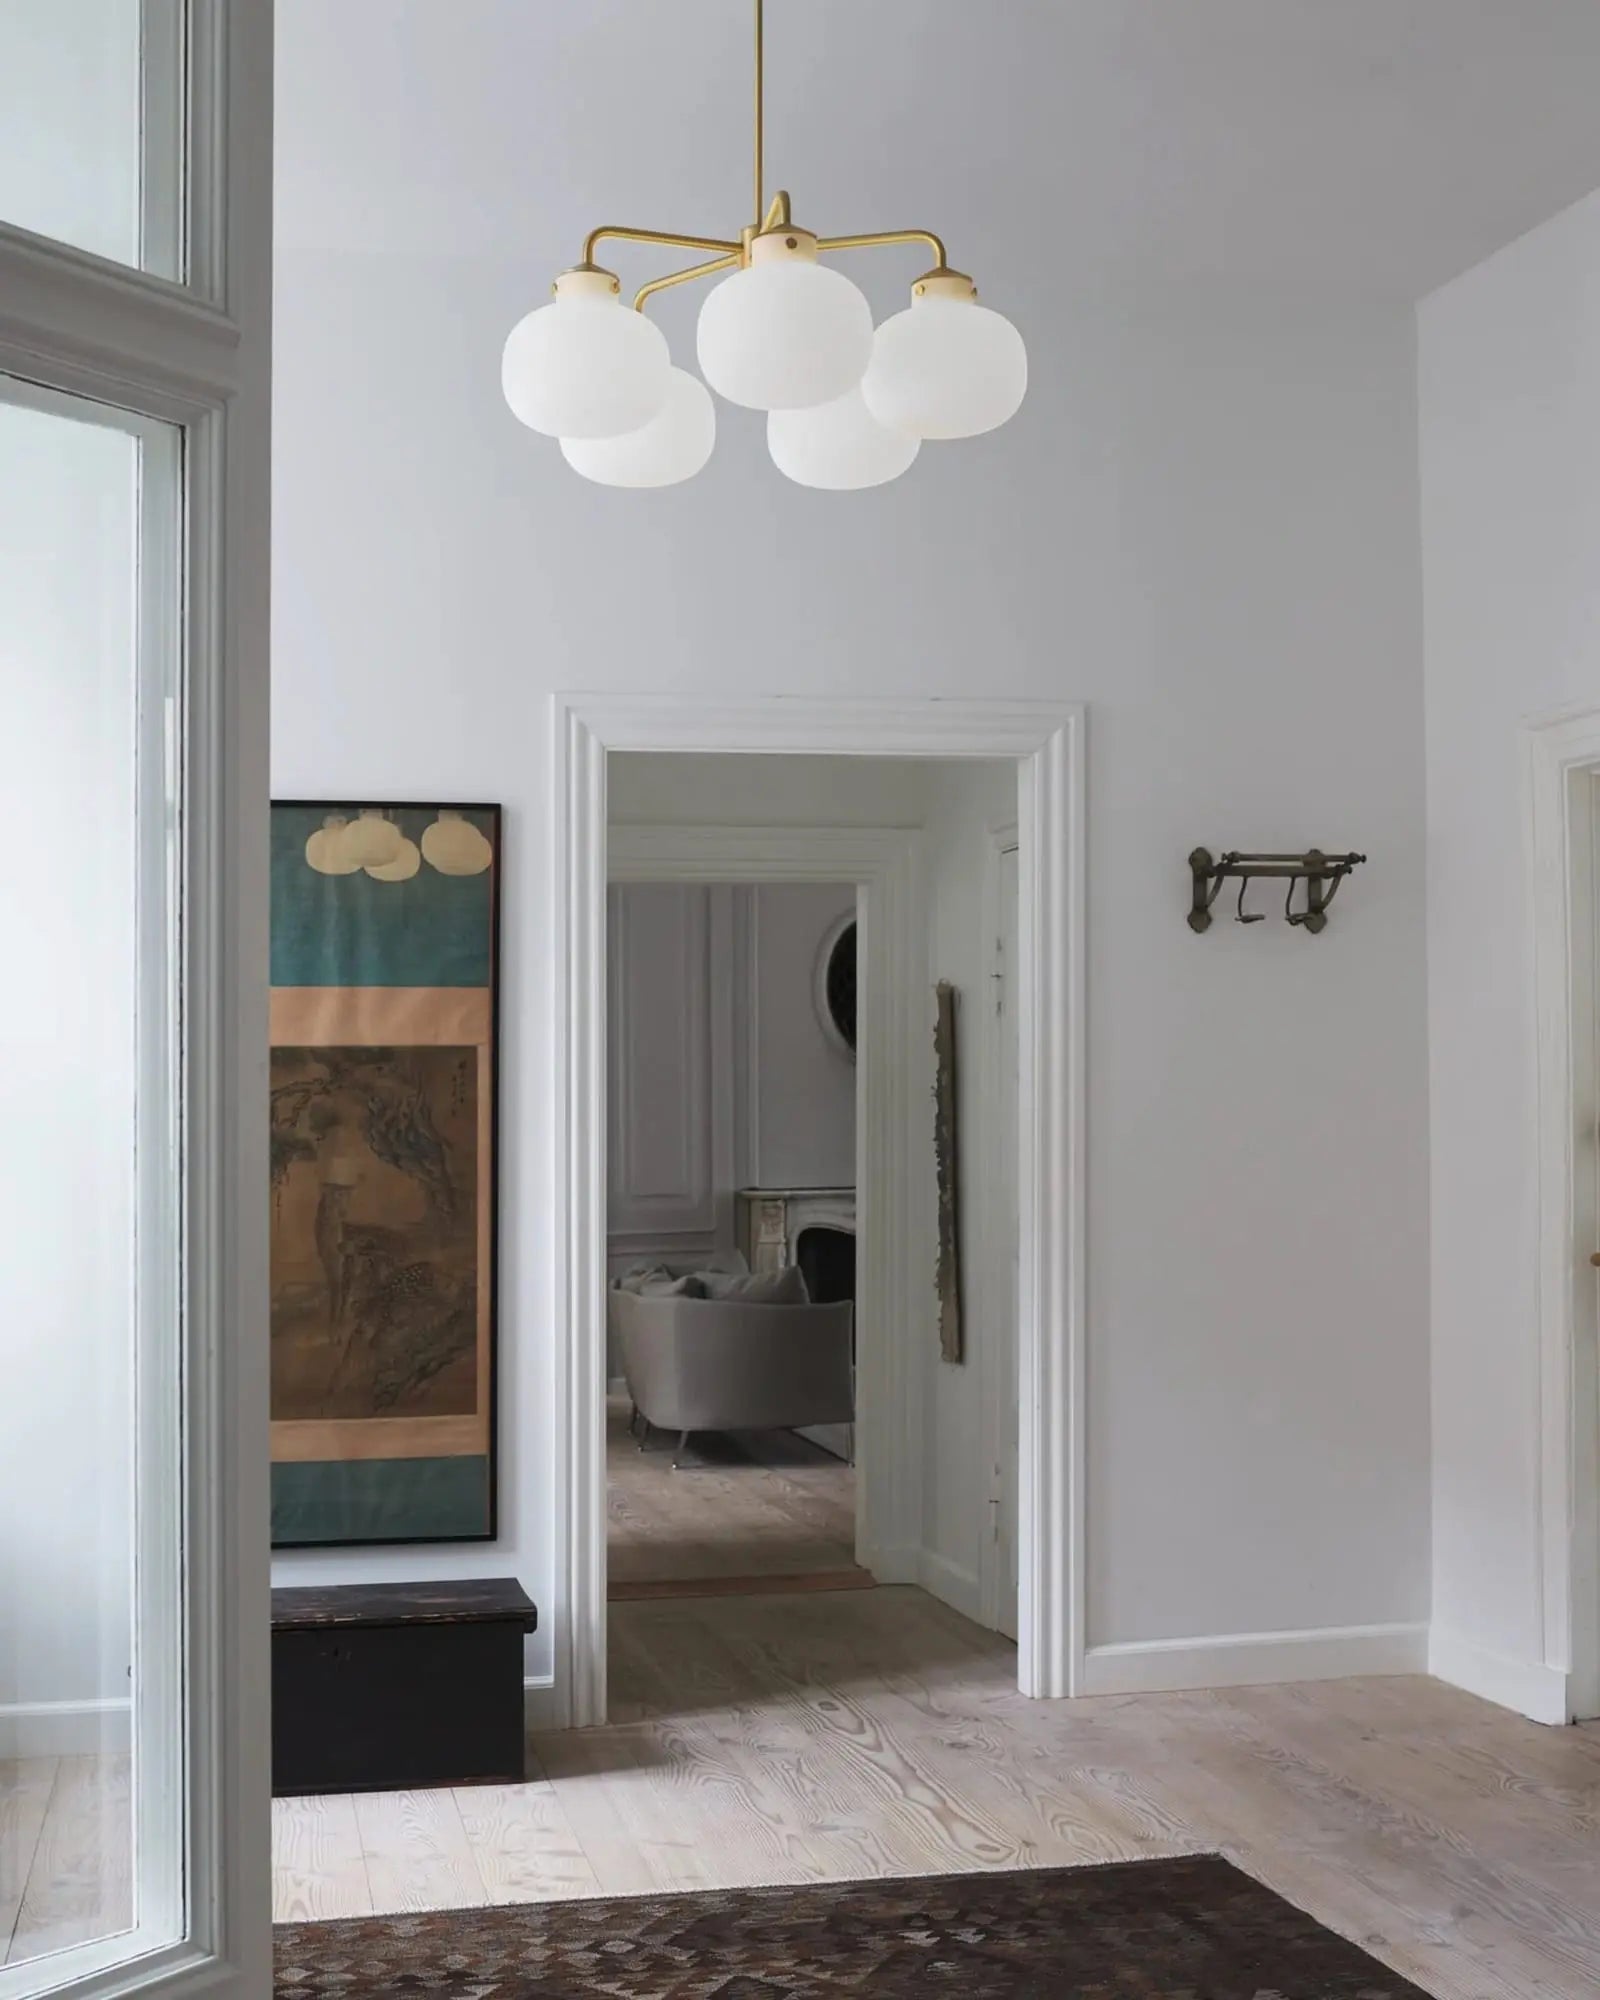 Raito 5 brass and opal glass pendant light in an entrance